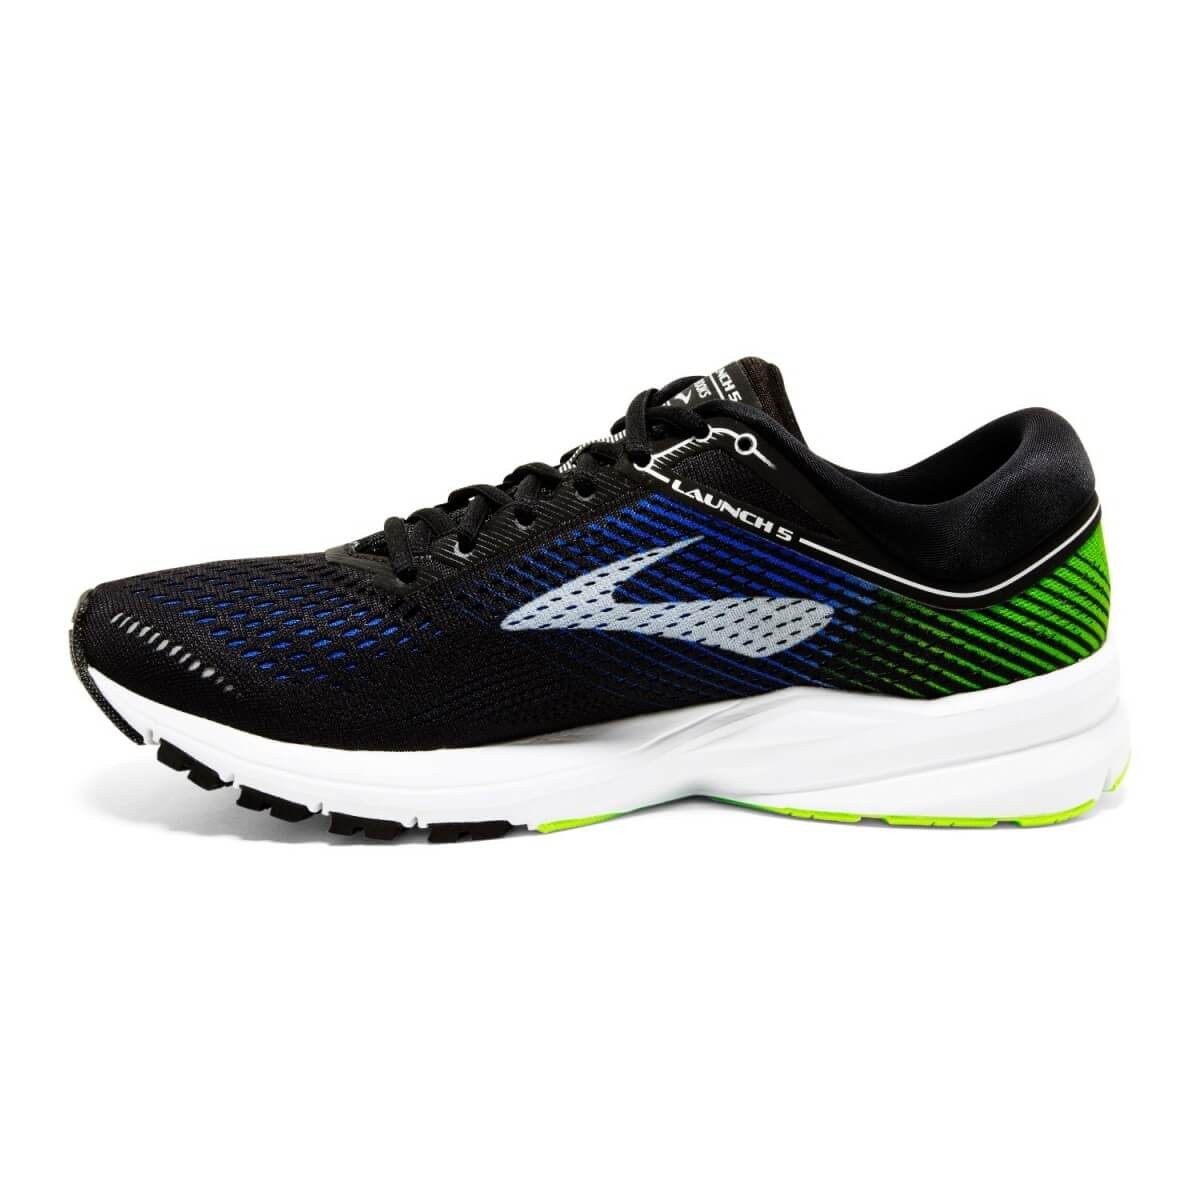 Brooks Men's Launch 5 Blue/Black/Lime Running Shoes - 365 Rider